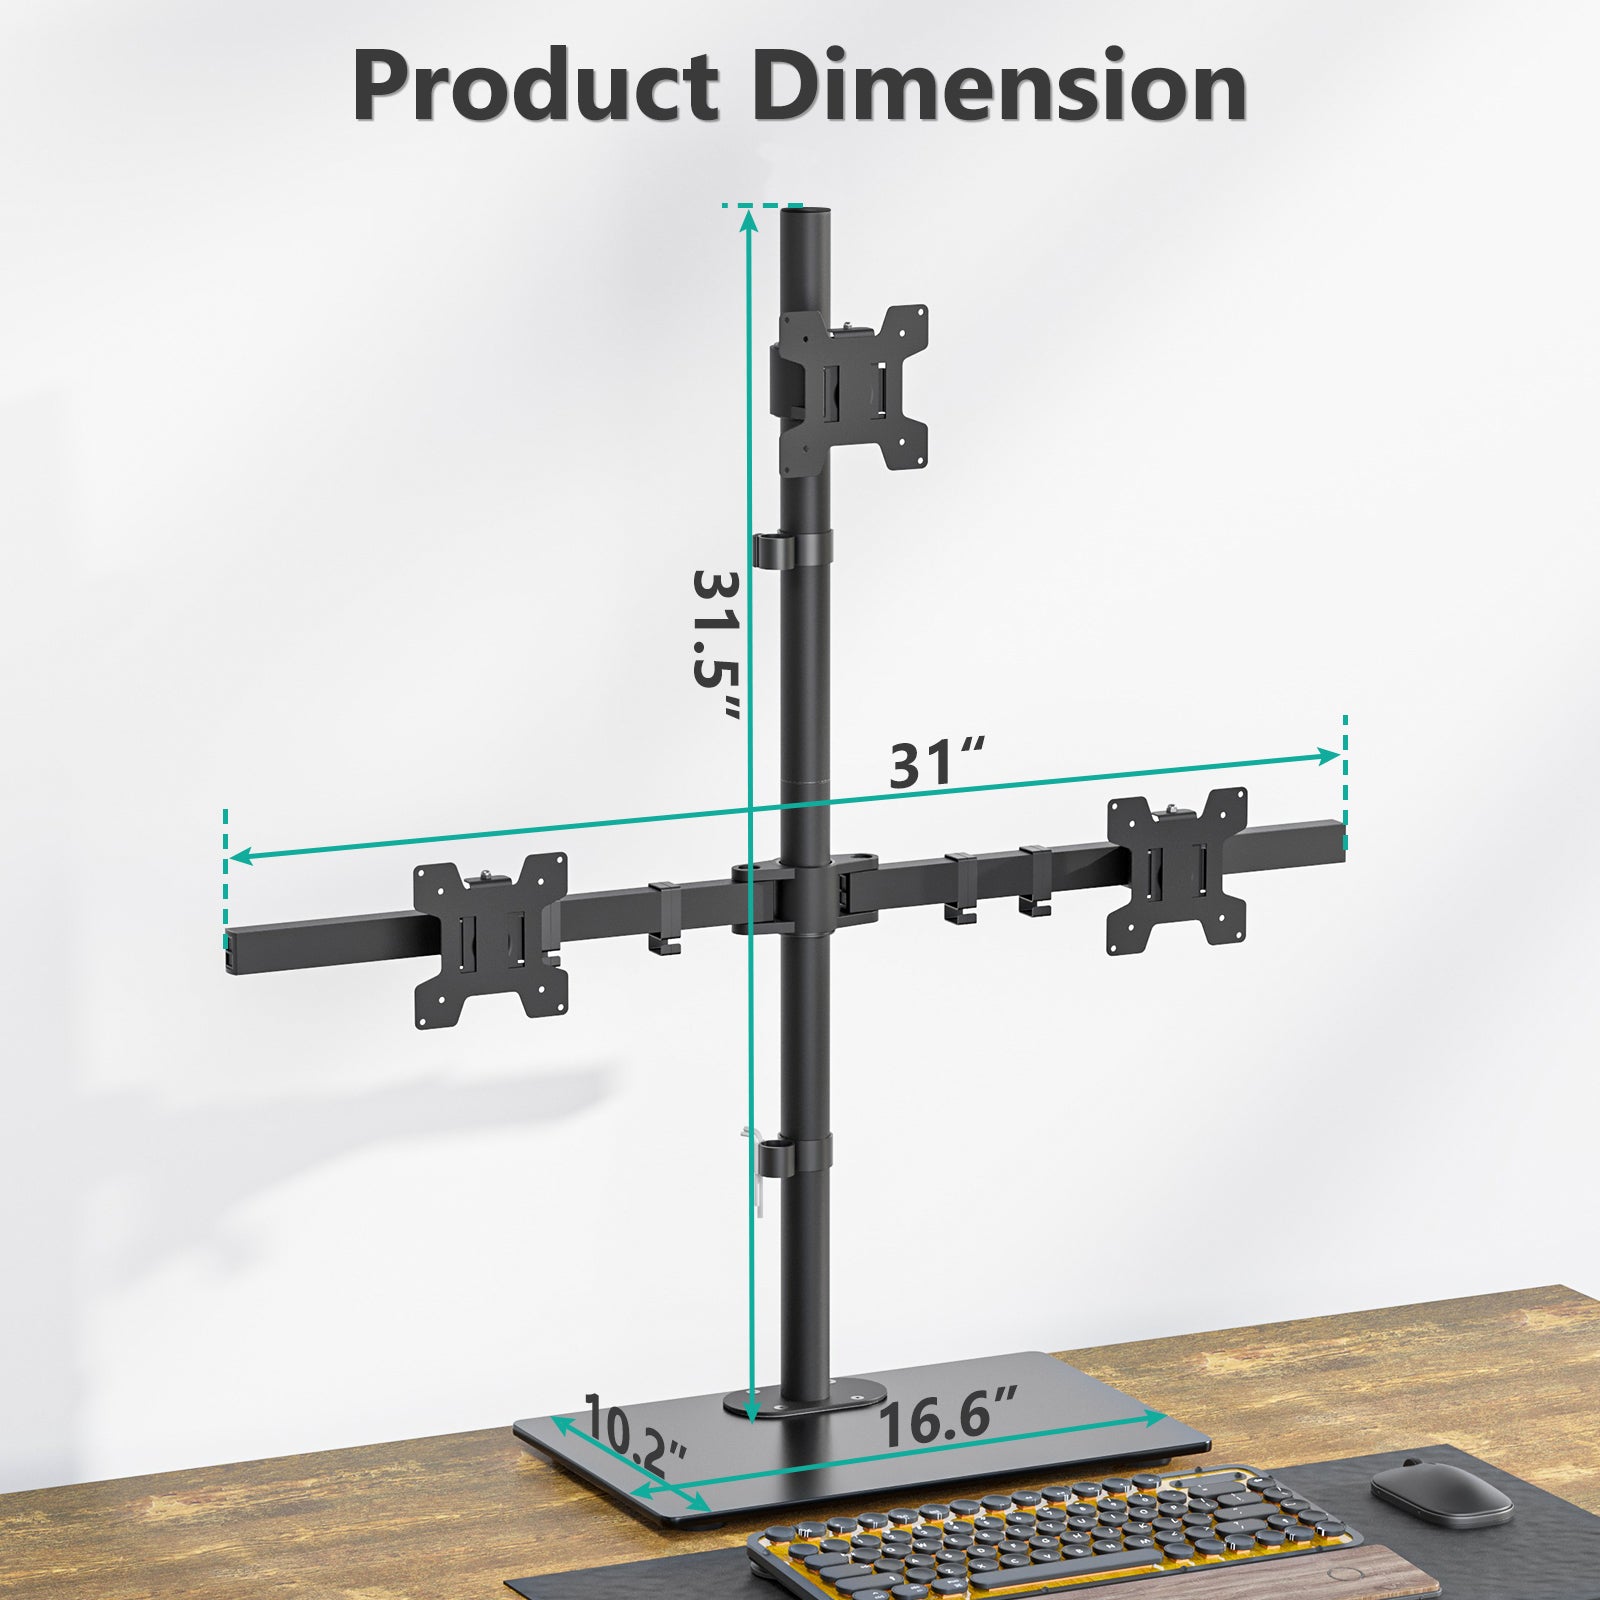 WALI Triple Monitor Stand, fits 3 Computer Screens up to 27 Inch